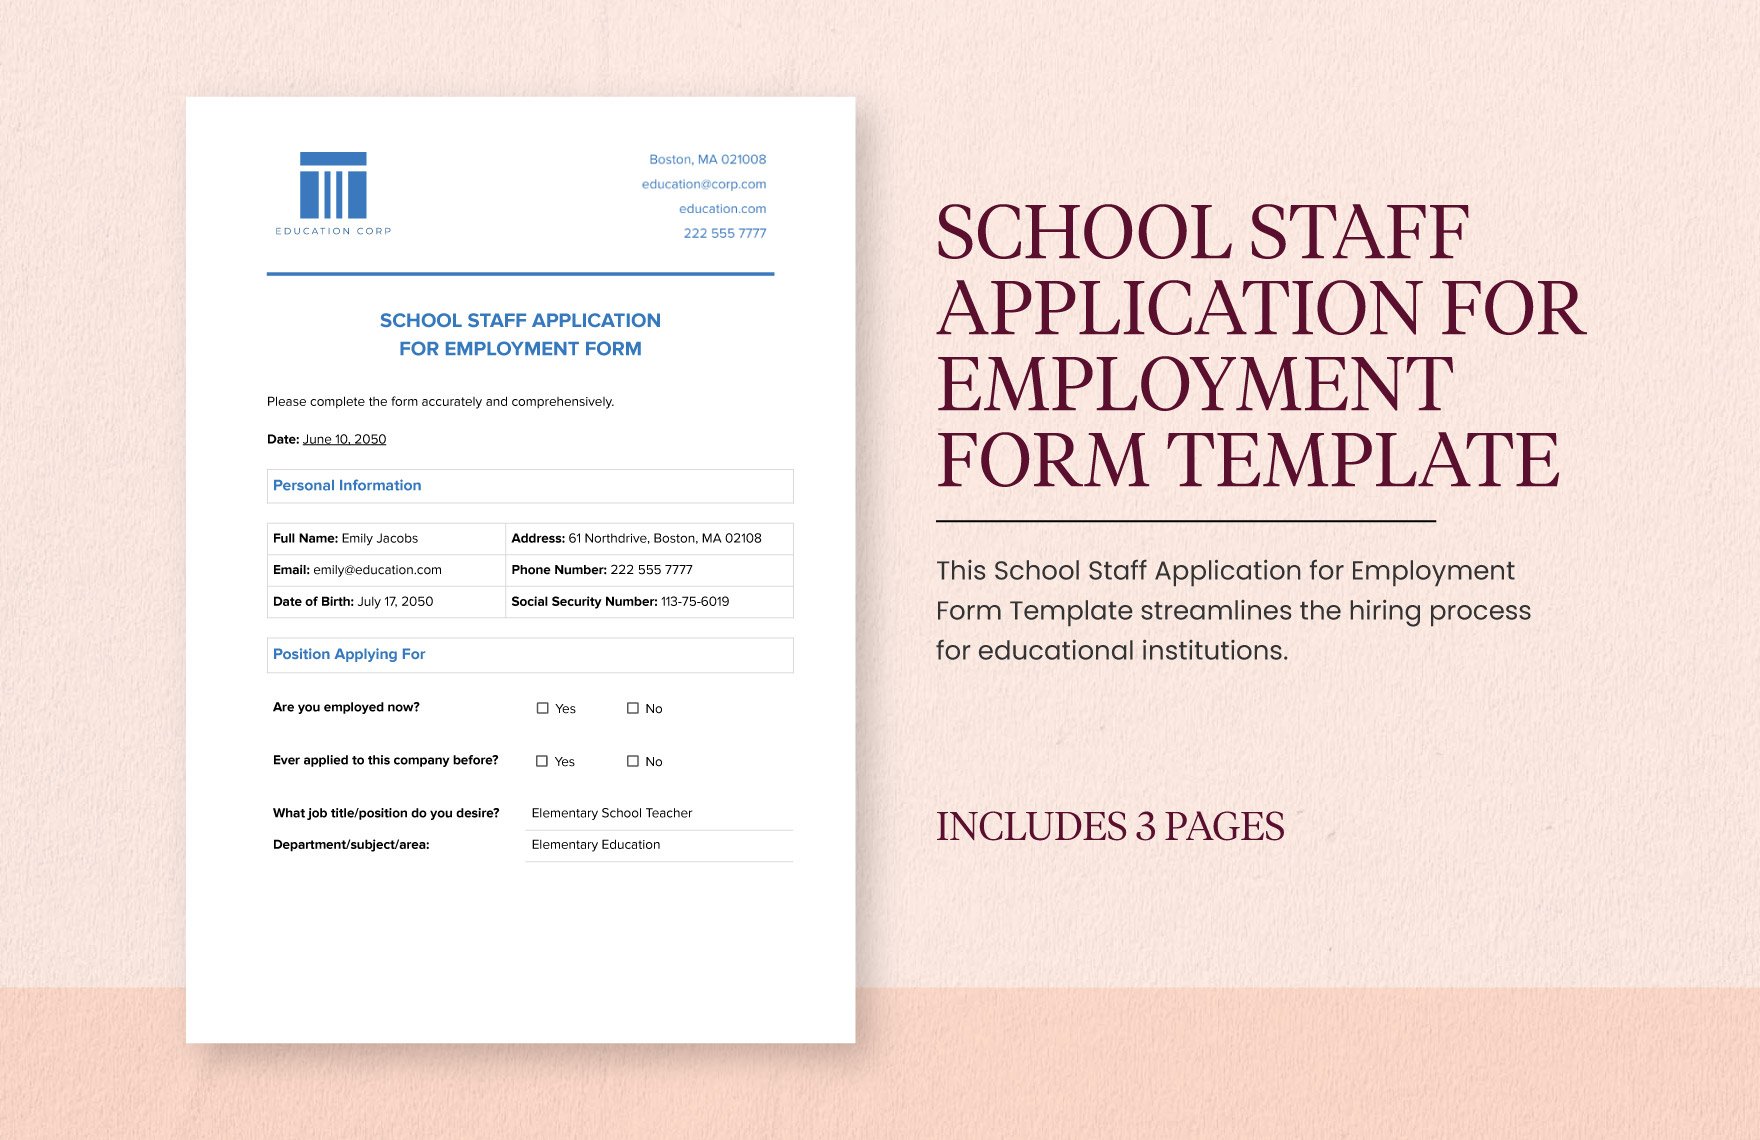 School Staff Application for Employment Form Template